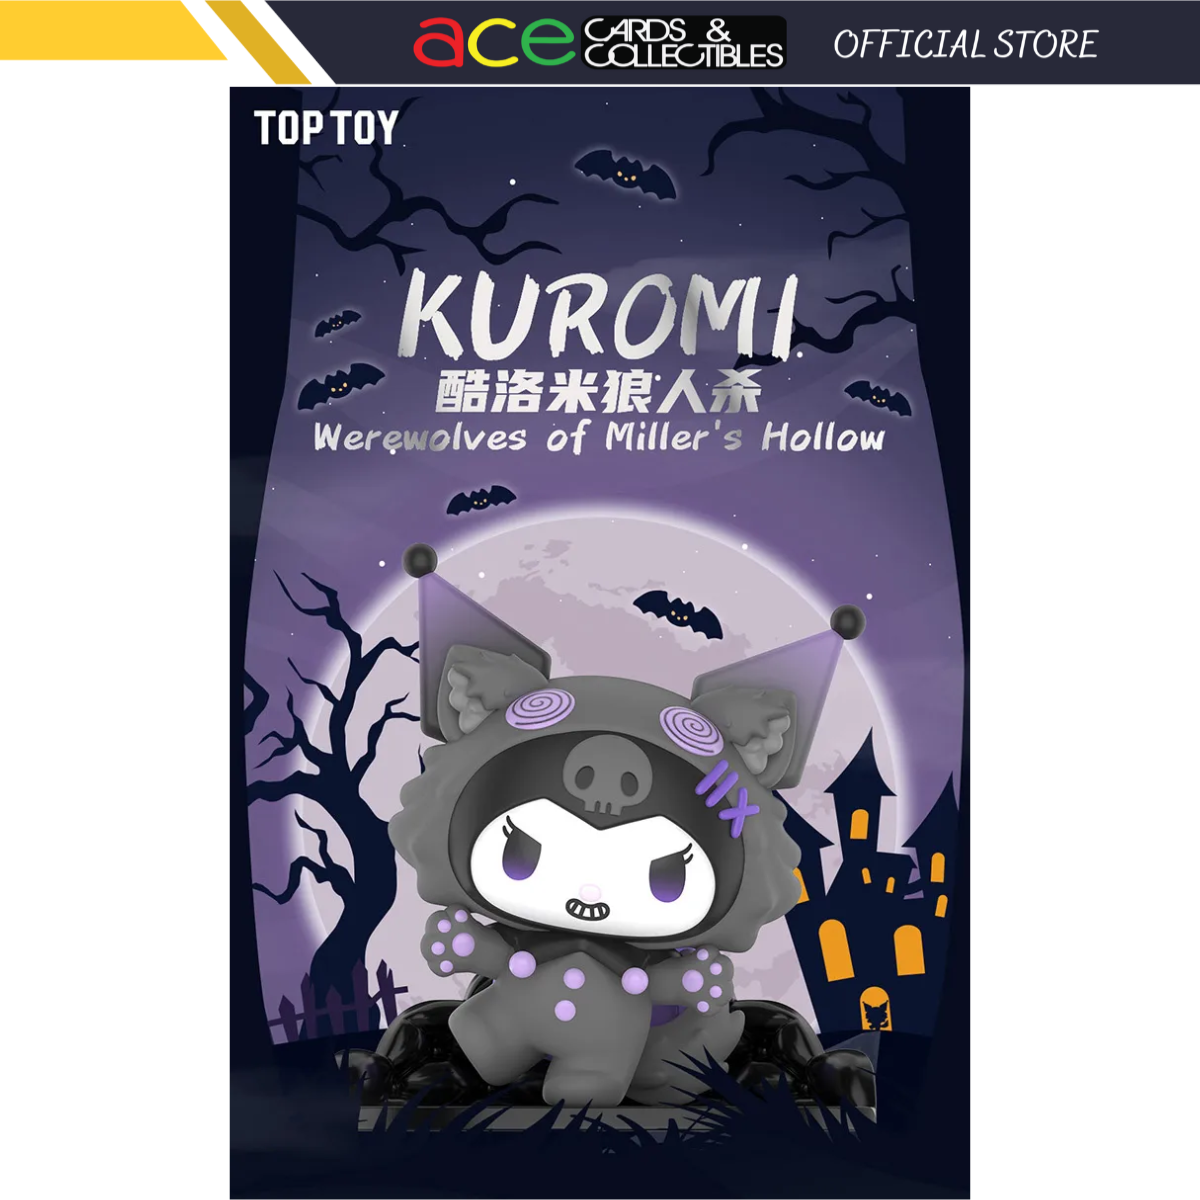 Kuromi Werewolves Of Miller's Hollow Series-Single Box (Random)-TopToy-Ace Cards & Collectibles